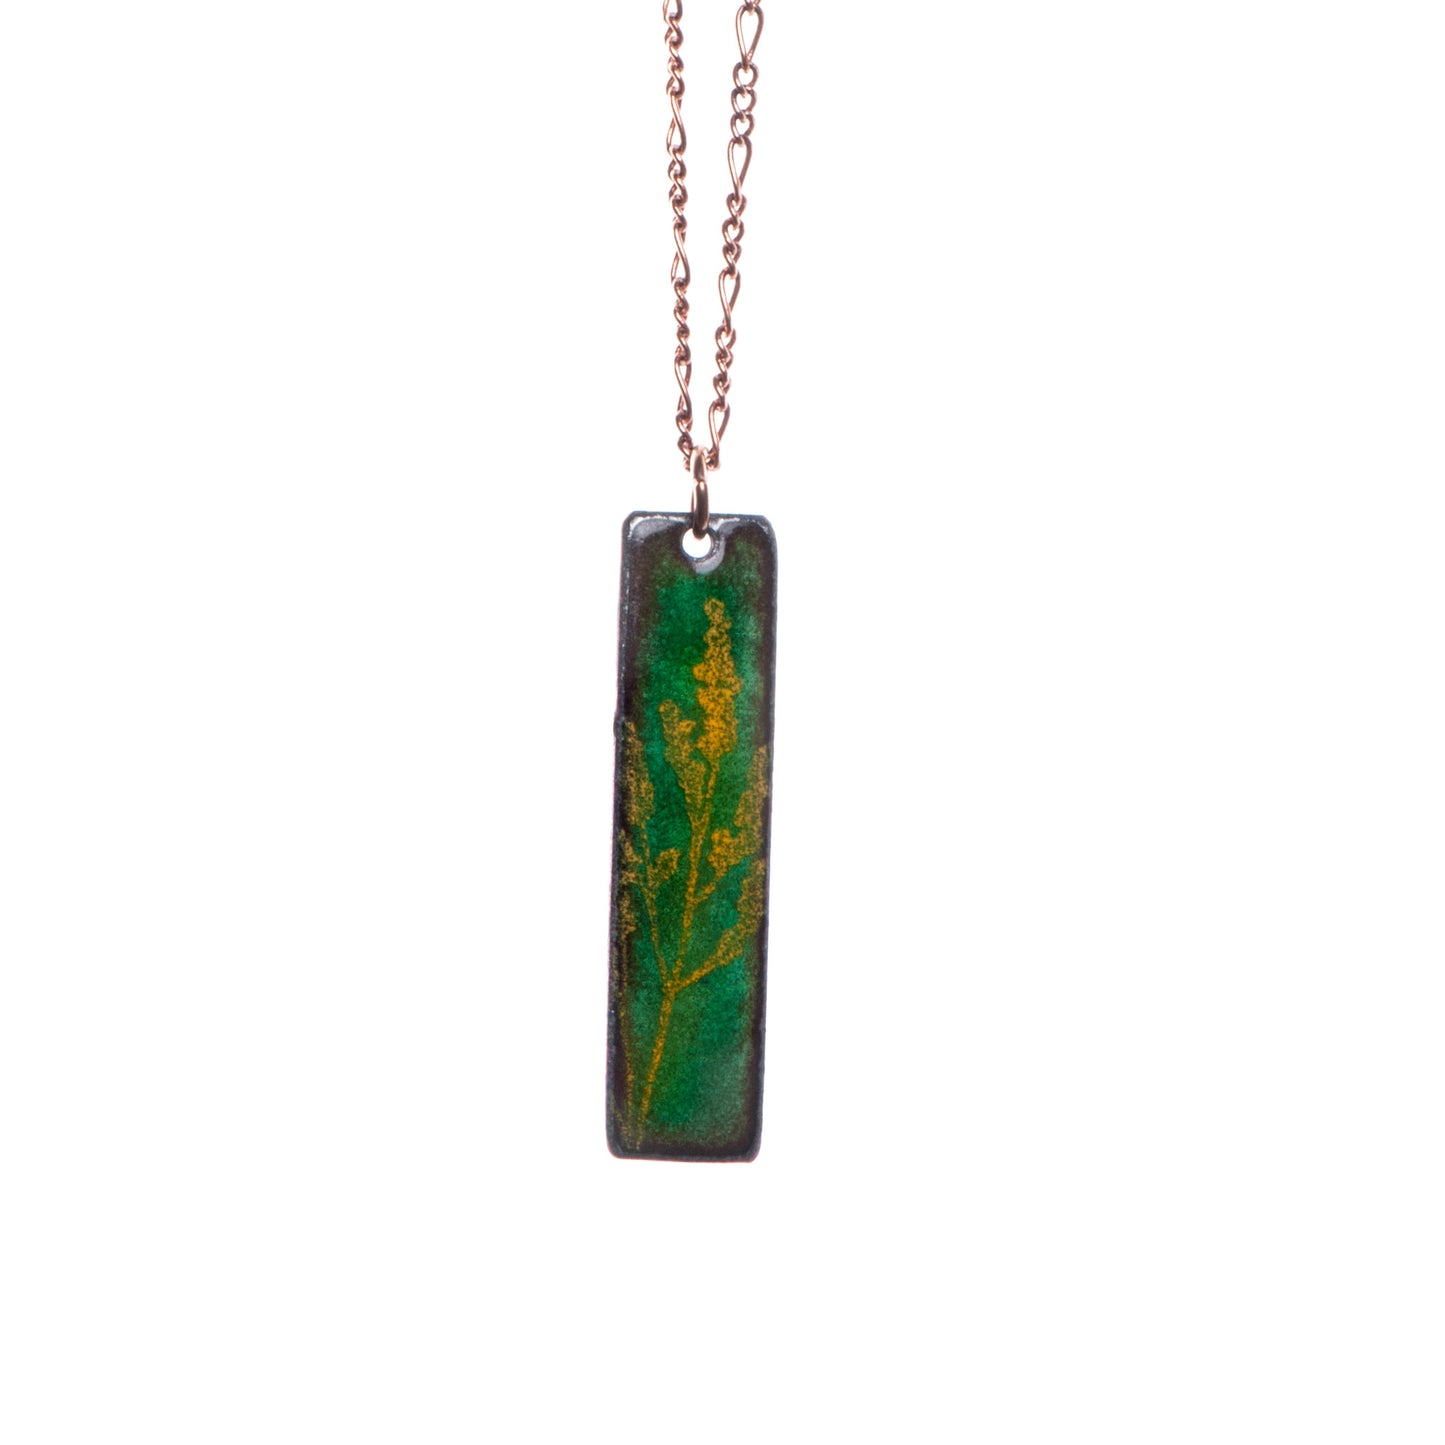 Goldenrod Necklace in Grass Green & Yellow